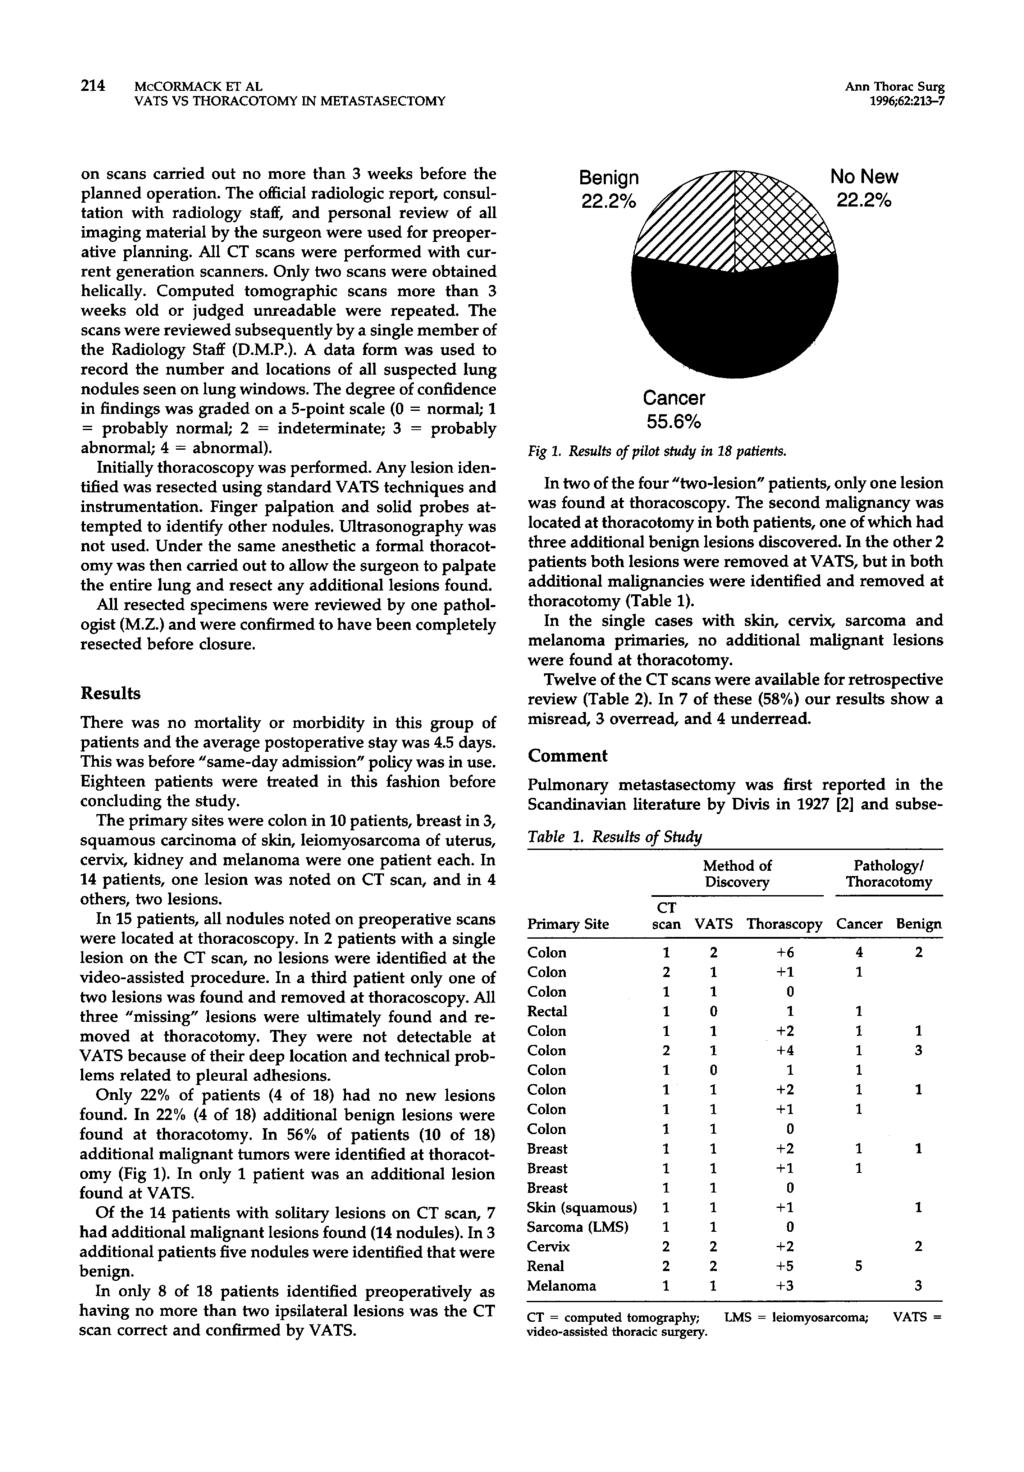 214 McCORMACK ET AL Ann Thorac Surg VATS VS THORACOTOMY IN METASTASECTOMY 1996;62:213--7 on scans carried out no more than 3 weeks before the planned operation.